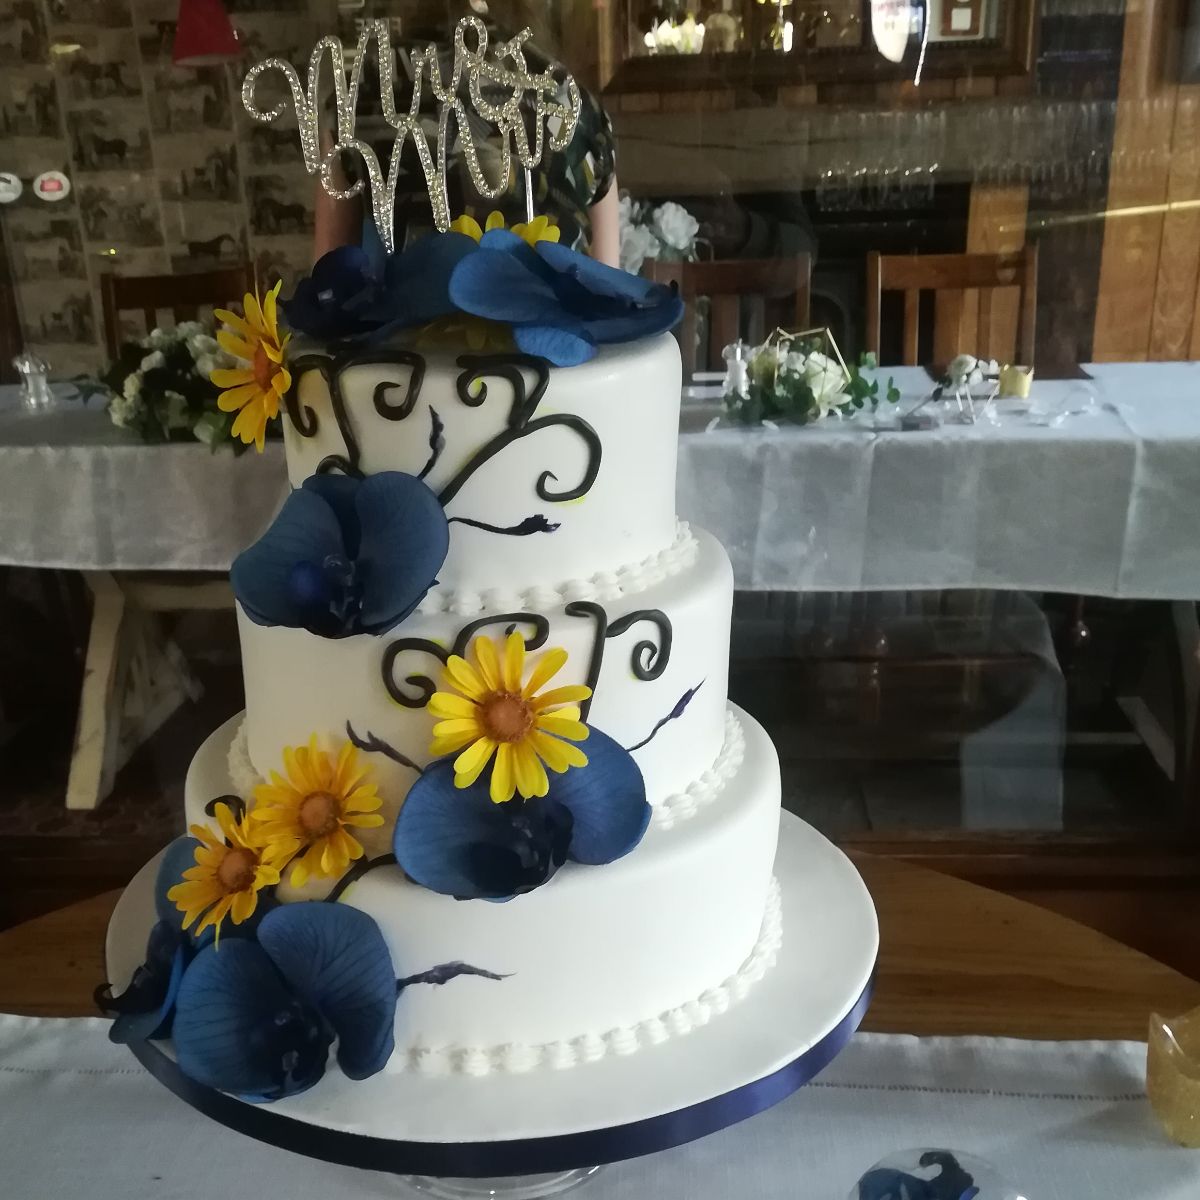 Cakes Unlimited of Yorkshire-Image-43